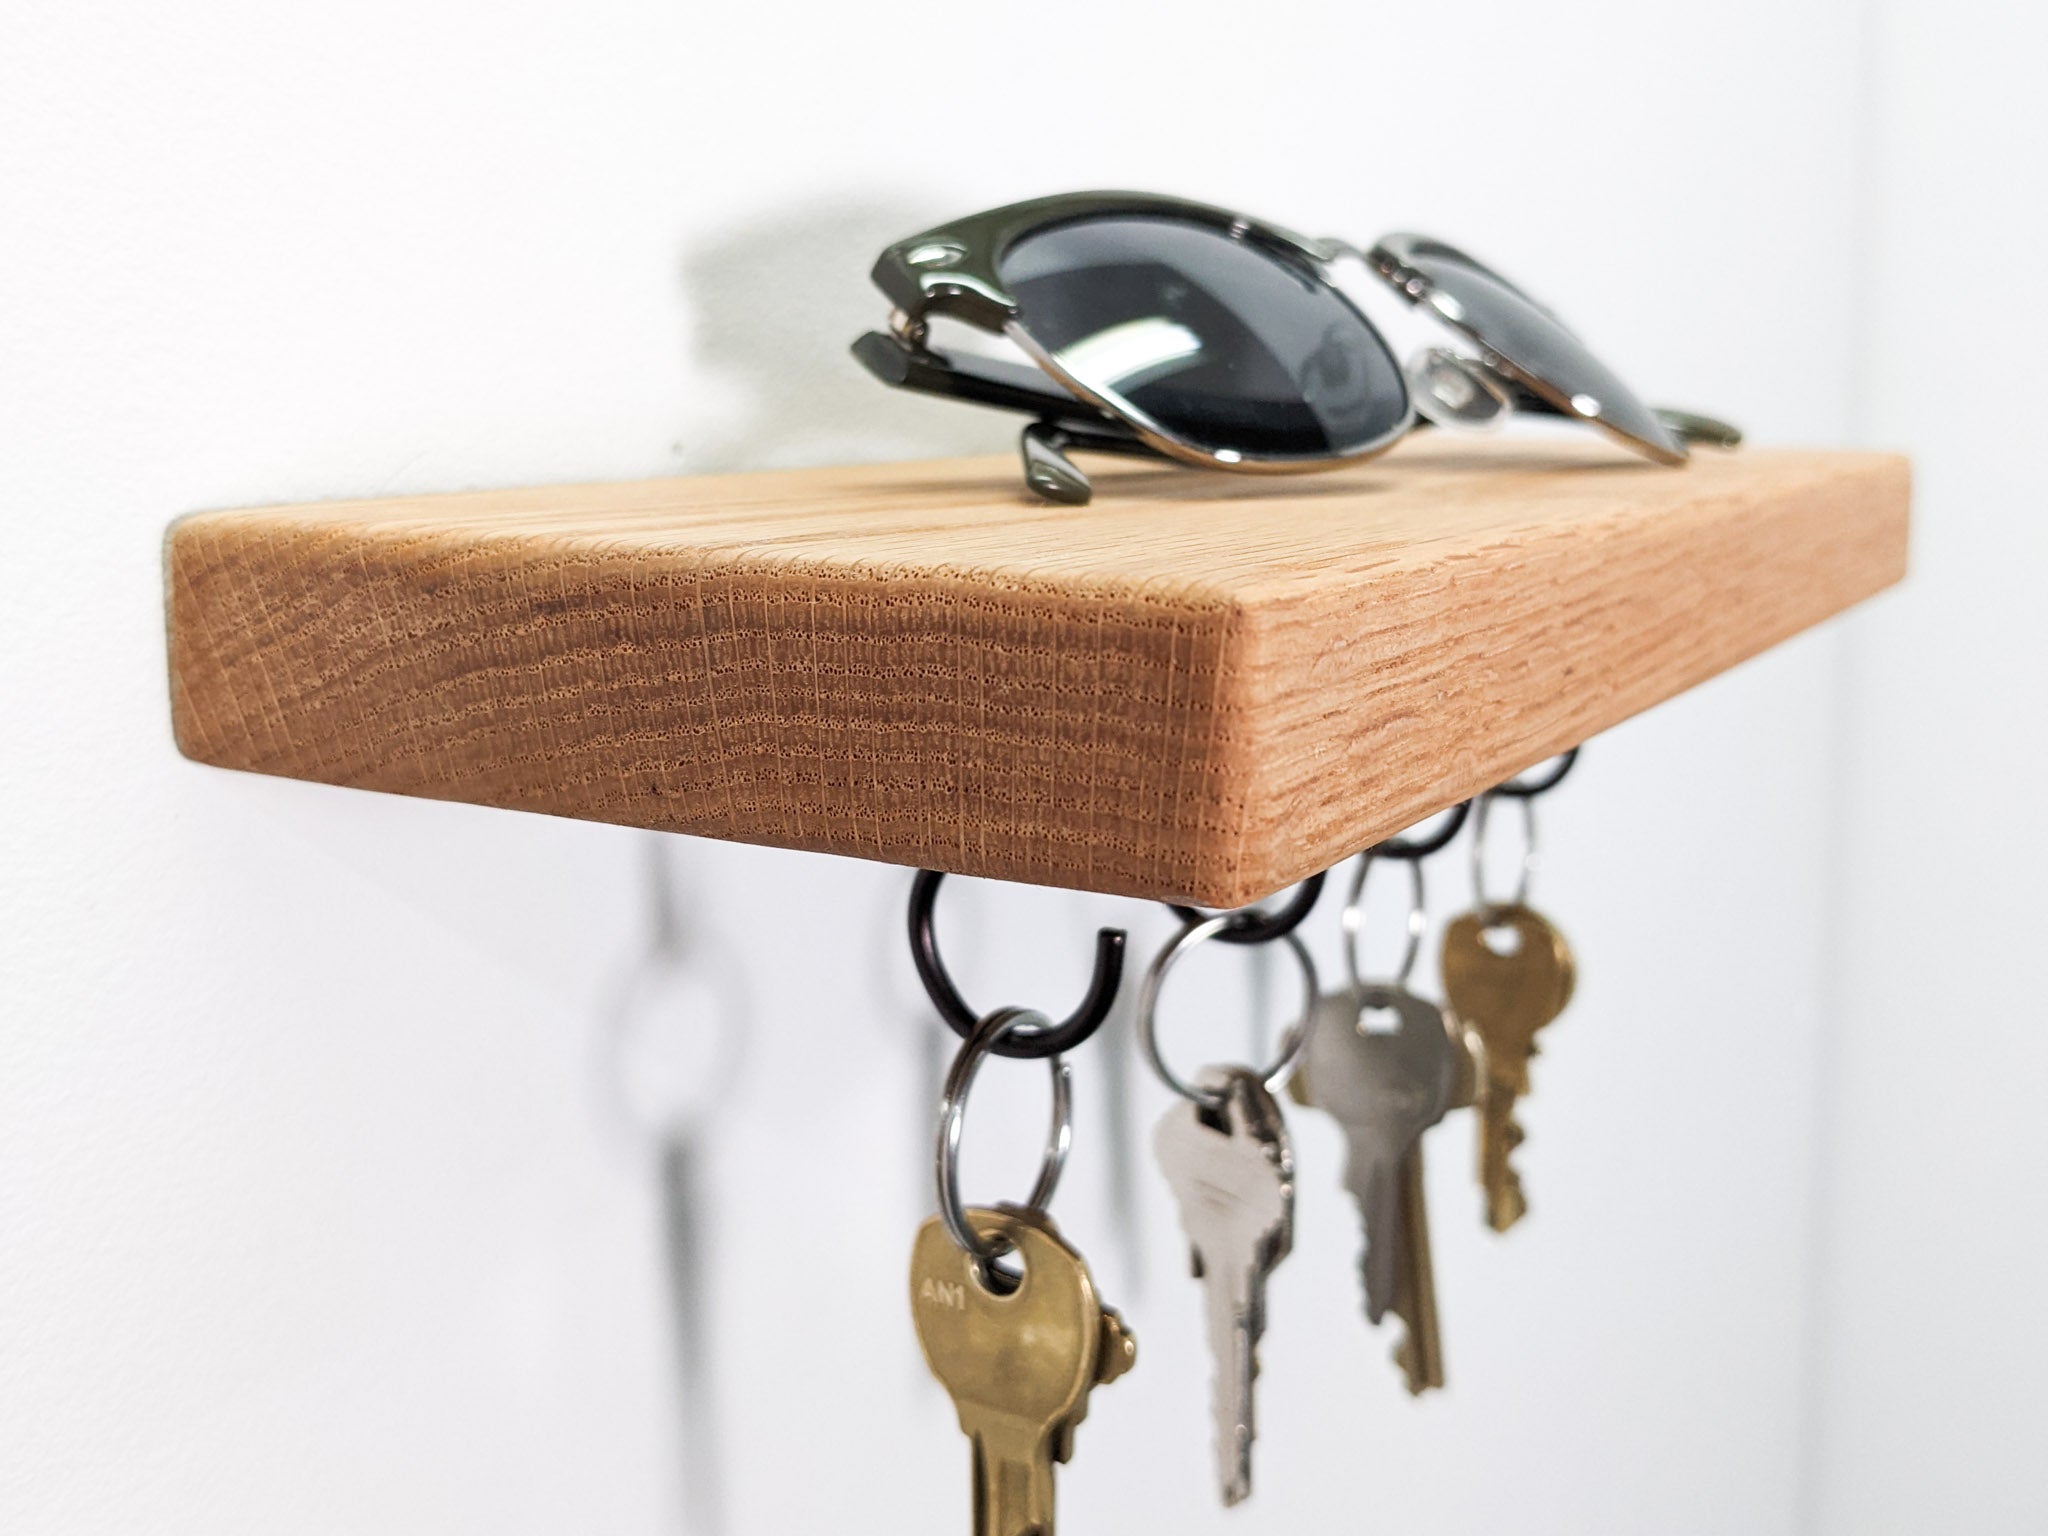 A side view of a floating key hook shelf. The natural grain of the light oak wood presents as vertical-scratch-like-marks that reach up and over the soft beveled edges of the corners. On the secure oak base sits a pair of black sunglasses. Below, four hanging black key hooks hold eight keys. Four keys are bronze and four are silver.